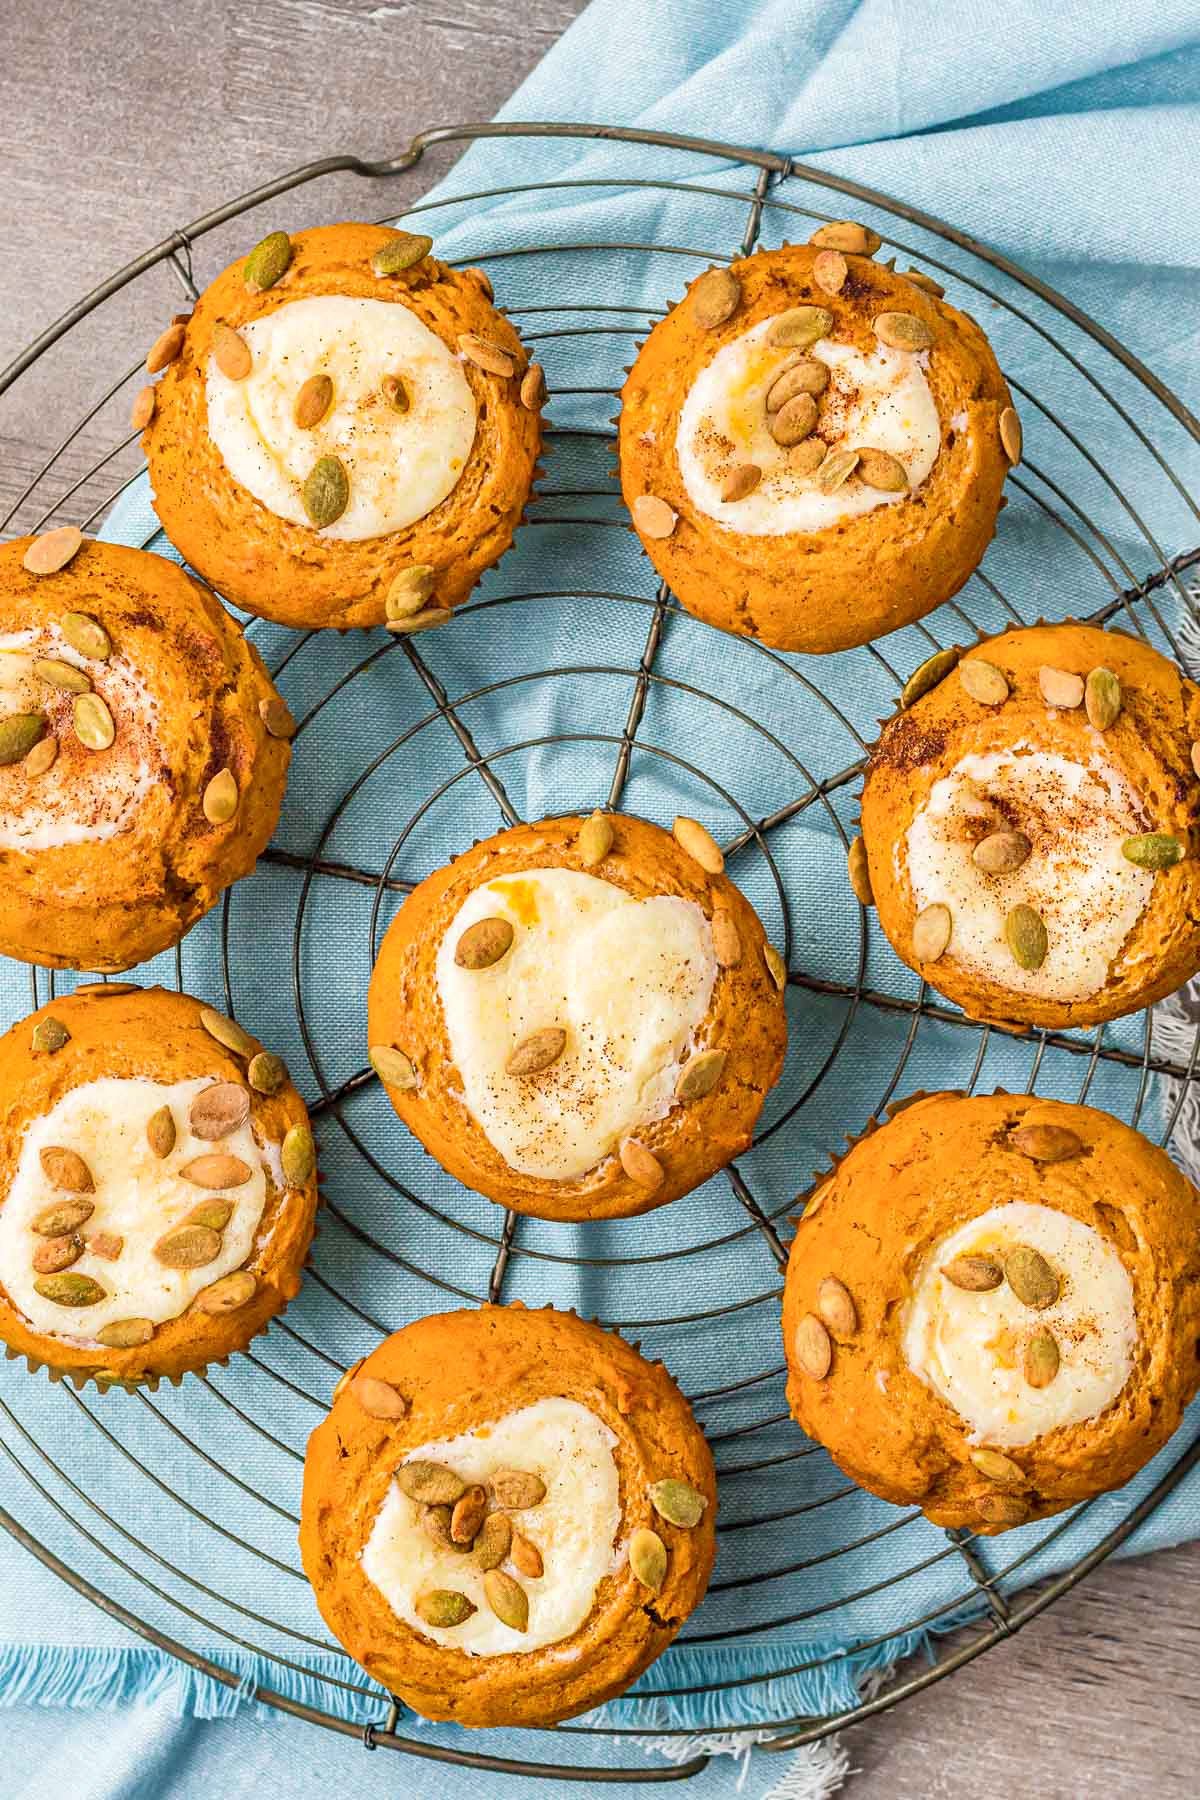 eight pumpkin muffins with cream cheese fillings are sitting on a wire rack on top of a light aqua colored napkin.